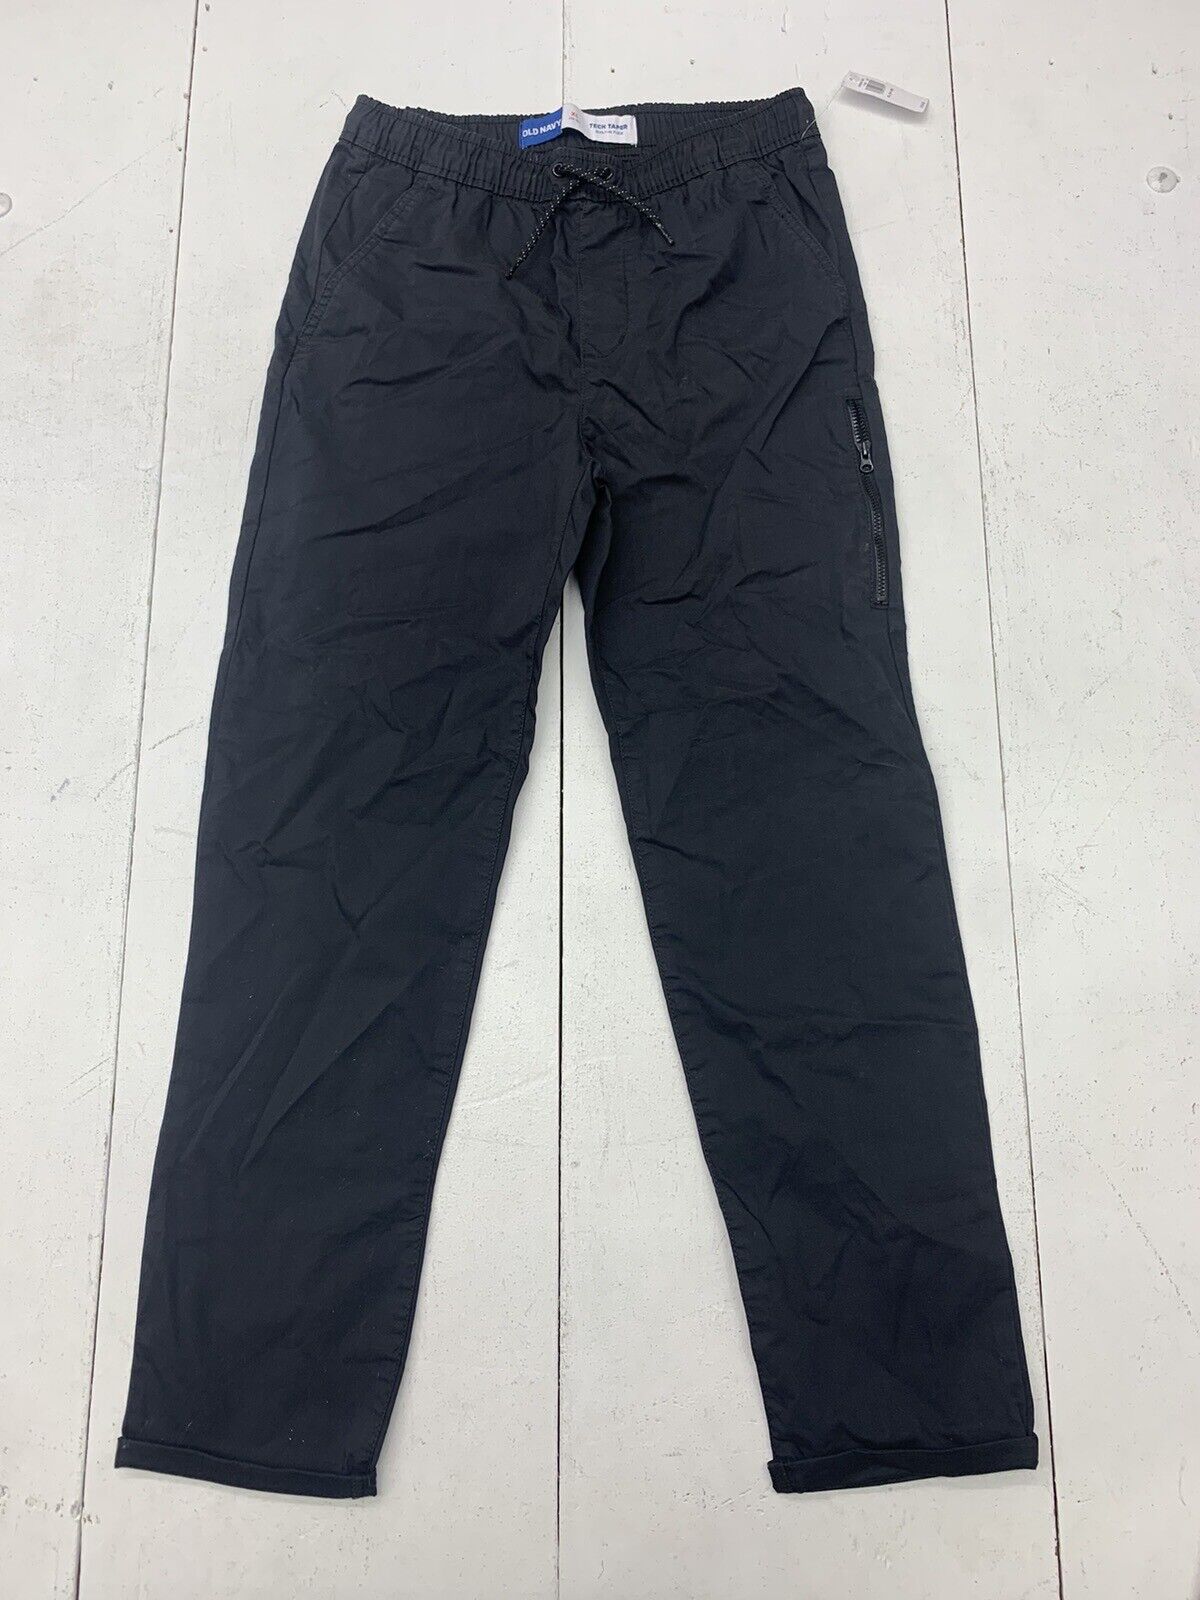 Old Navy Black Built-In Flex Twill Jogger Pants Boys Size XL NEW - beyond  exchange